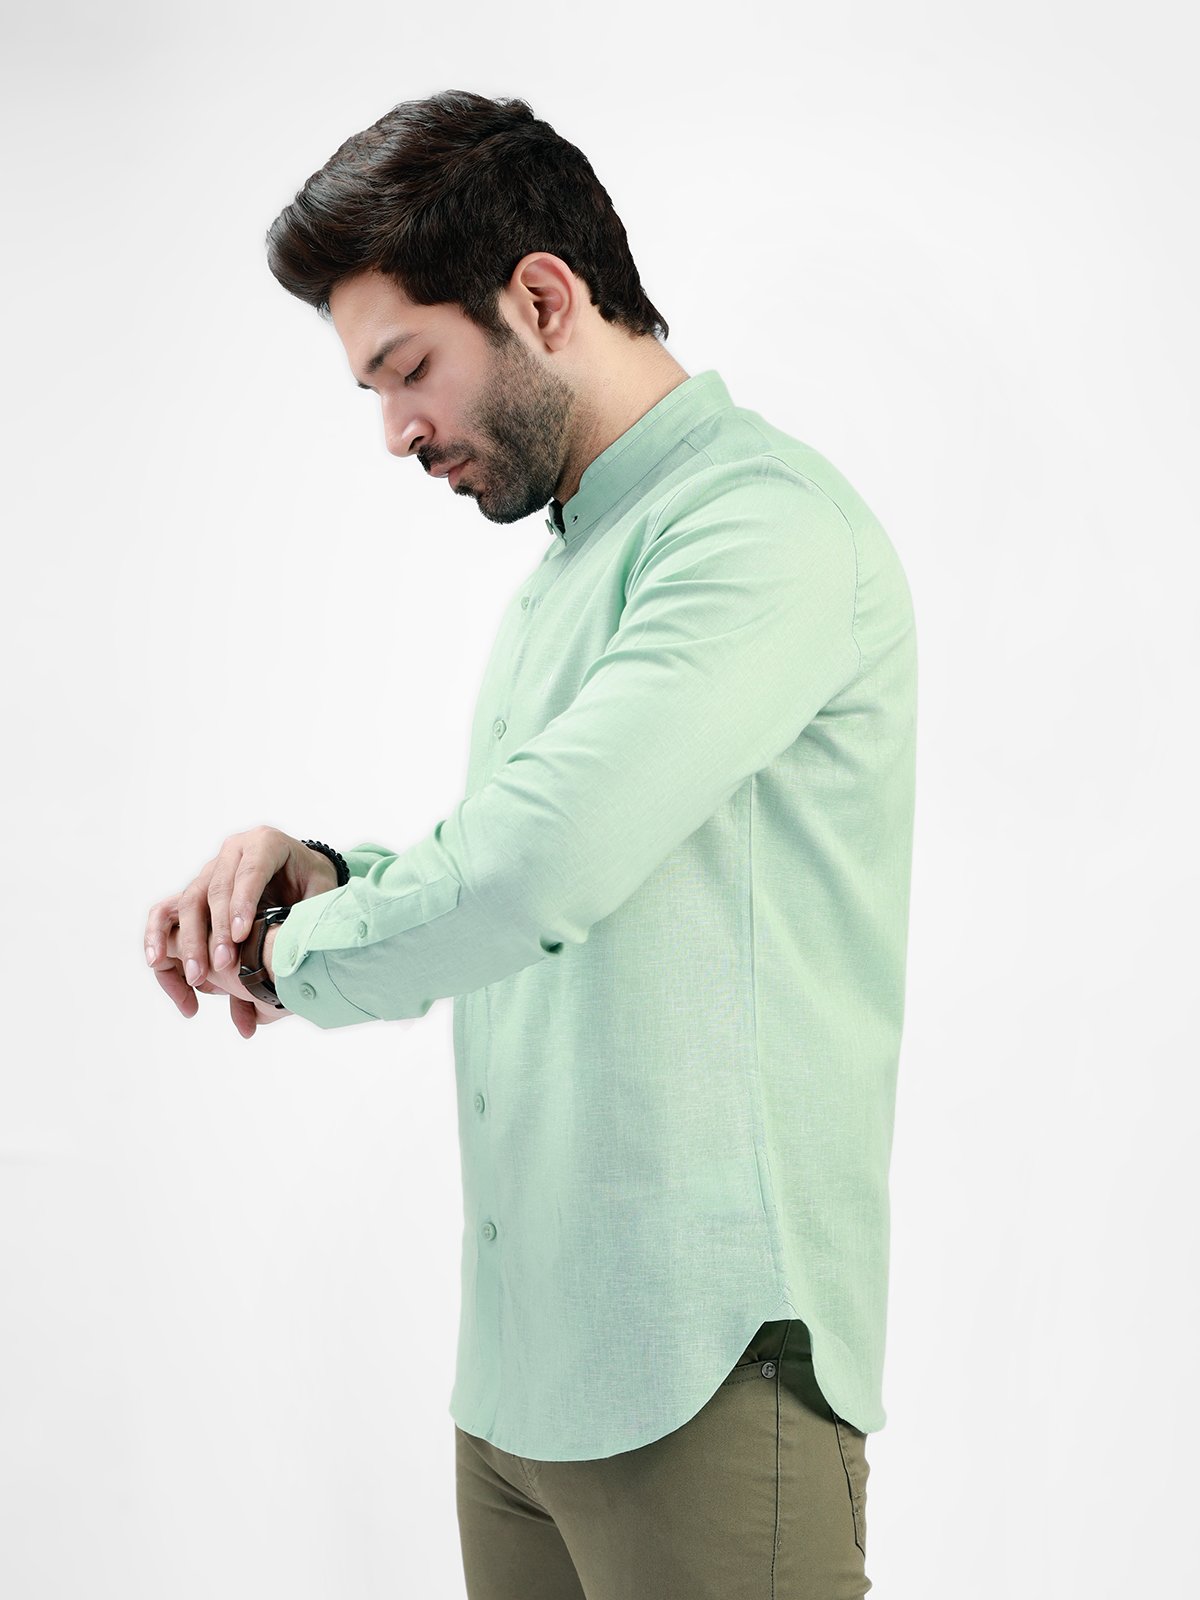 Men's Turquoise Casual Shirt - FMTS21-31463